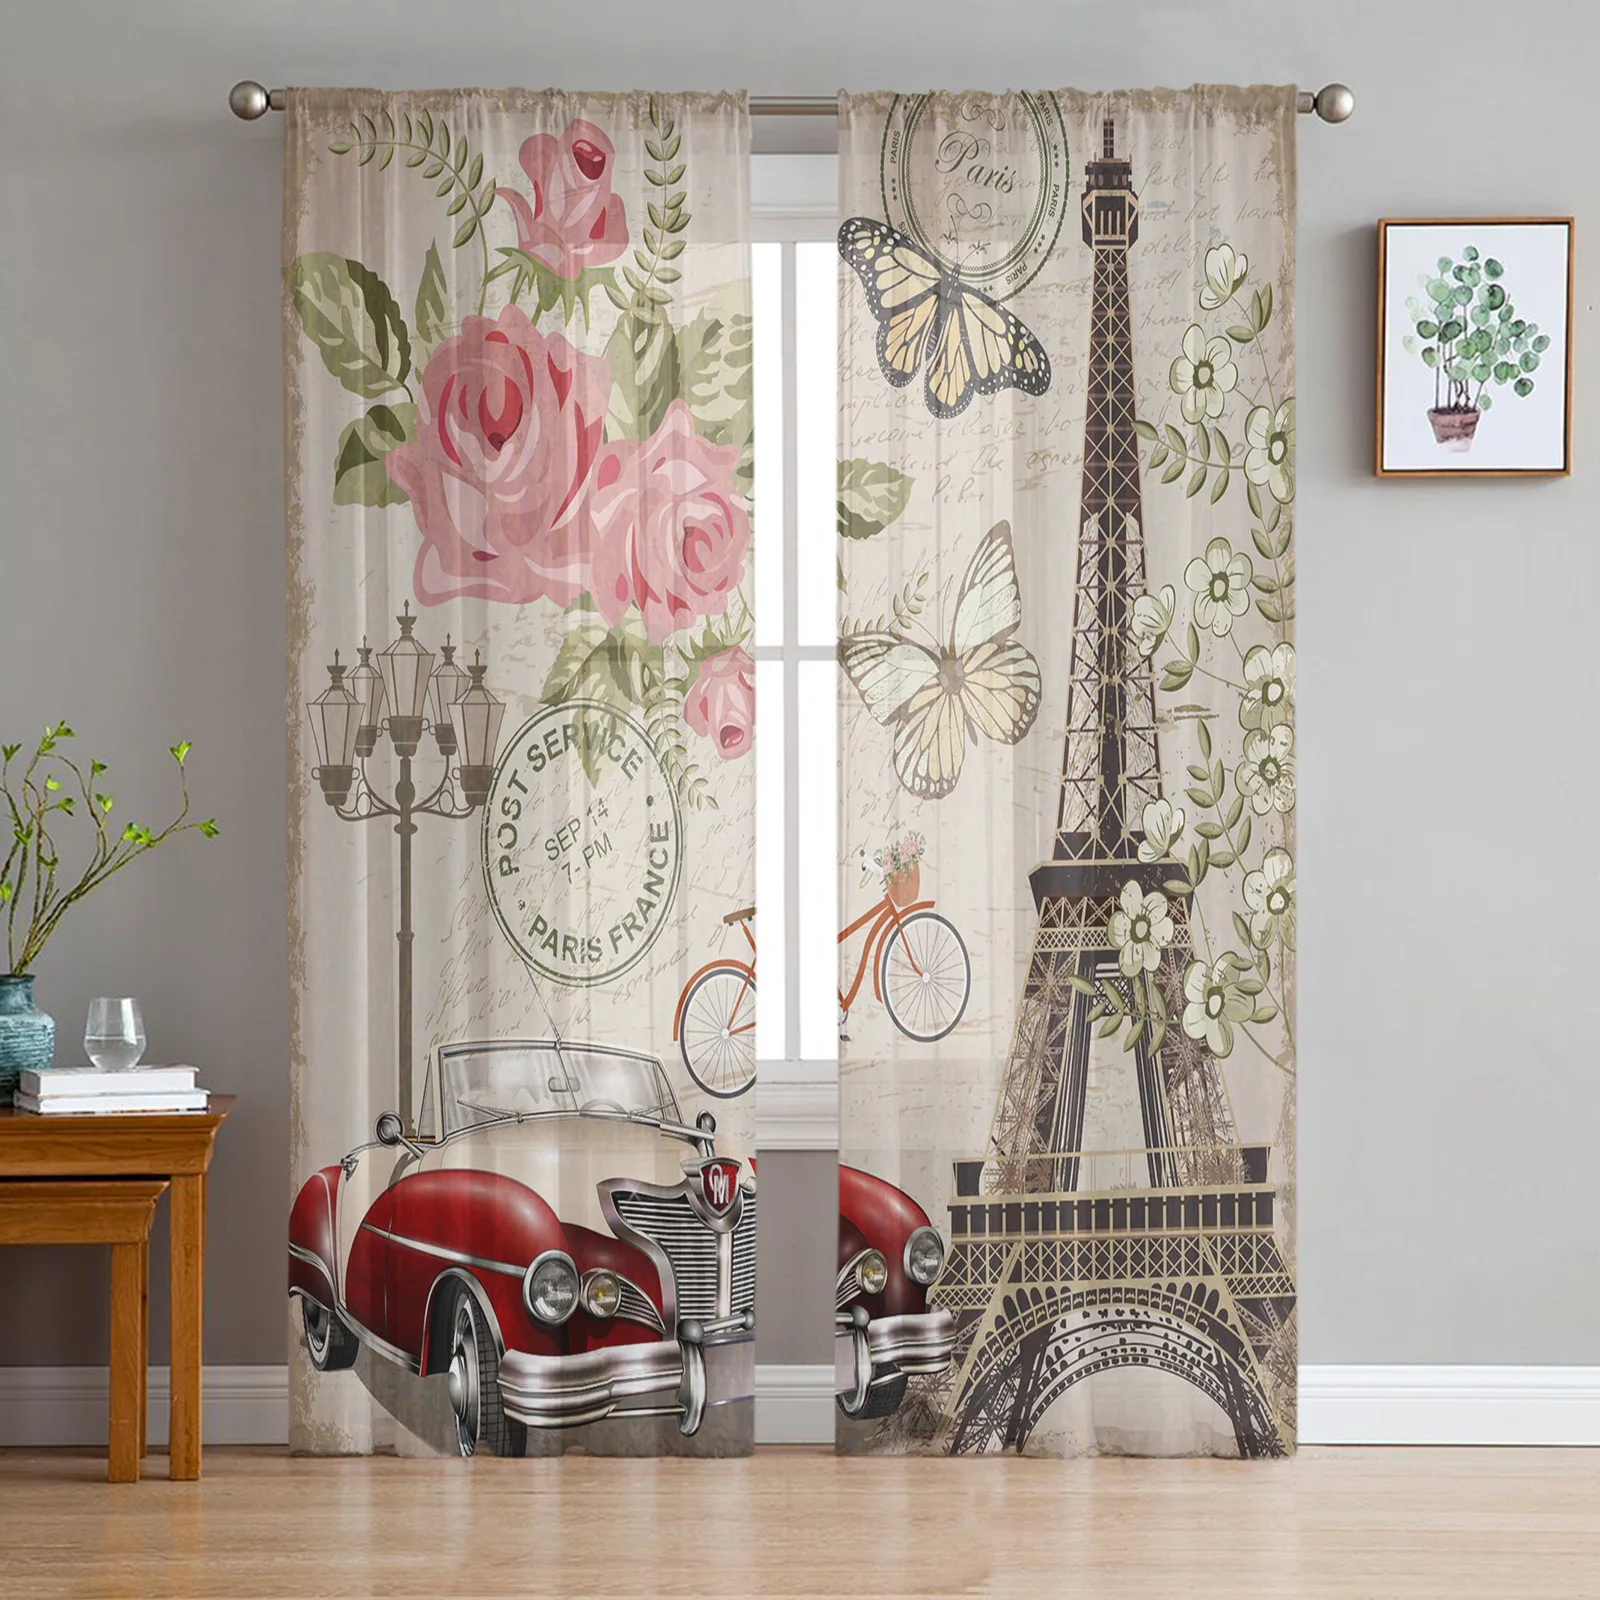 

Paris Eiffel Tower Butterfly Bedroom Organza Voile Curtain Window Treatment Drapes Tulle Curtains for Living Room Sheer Curtains